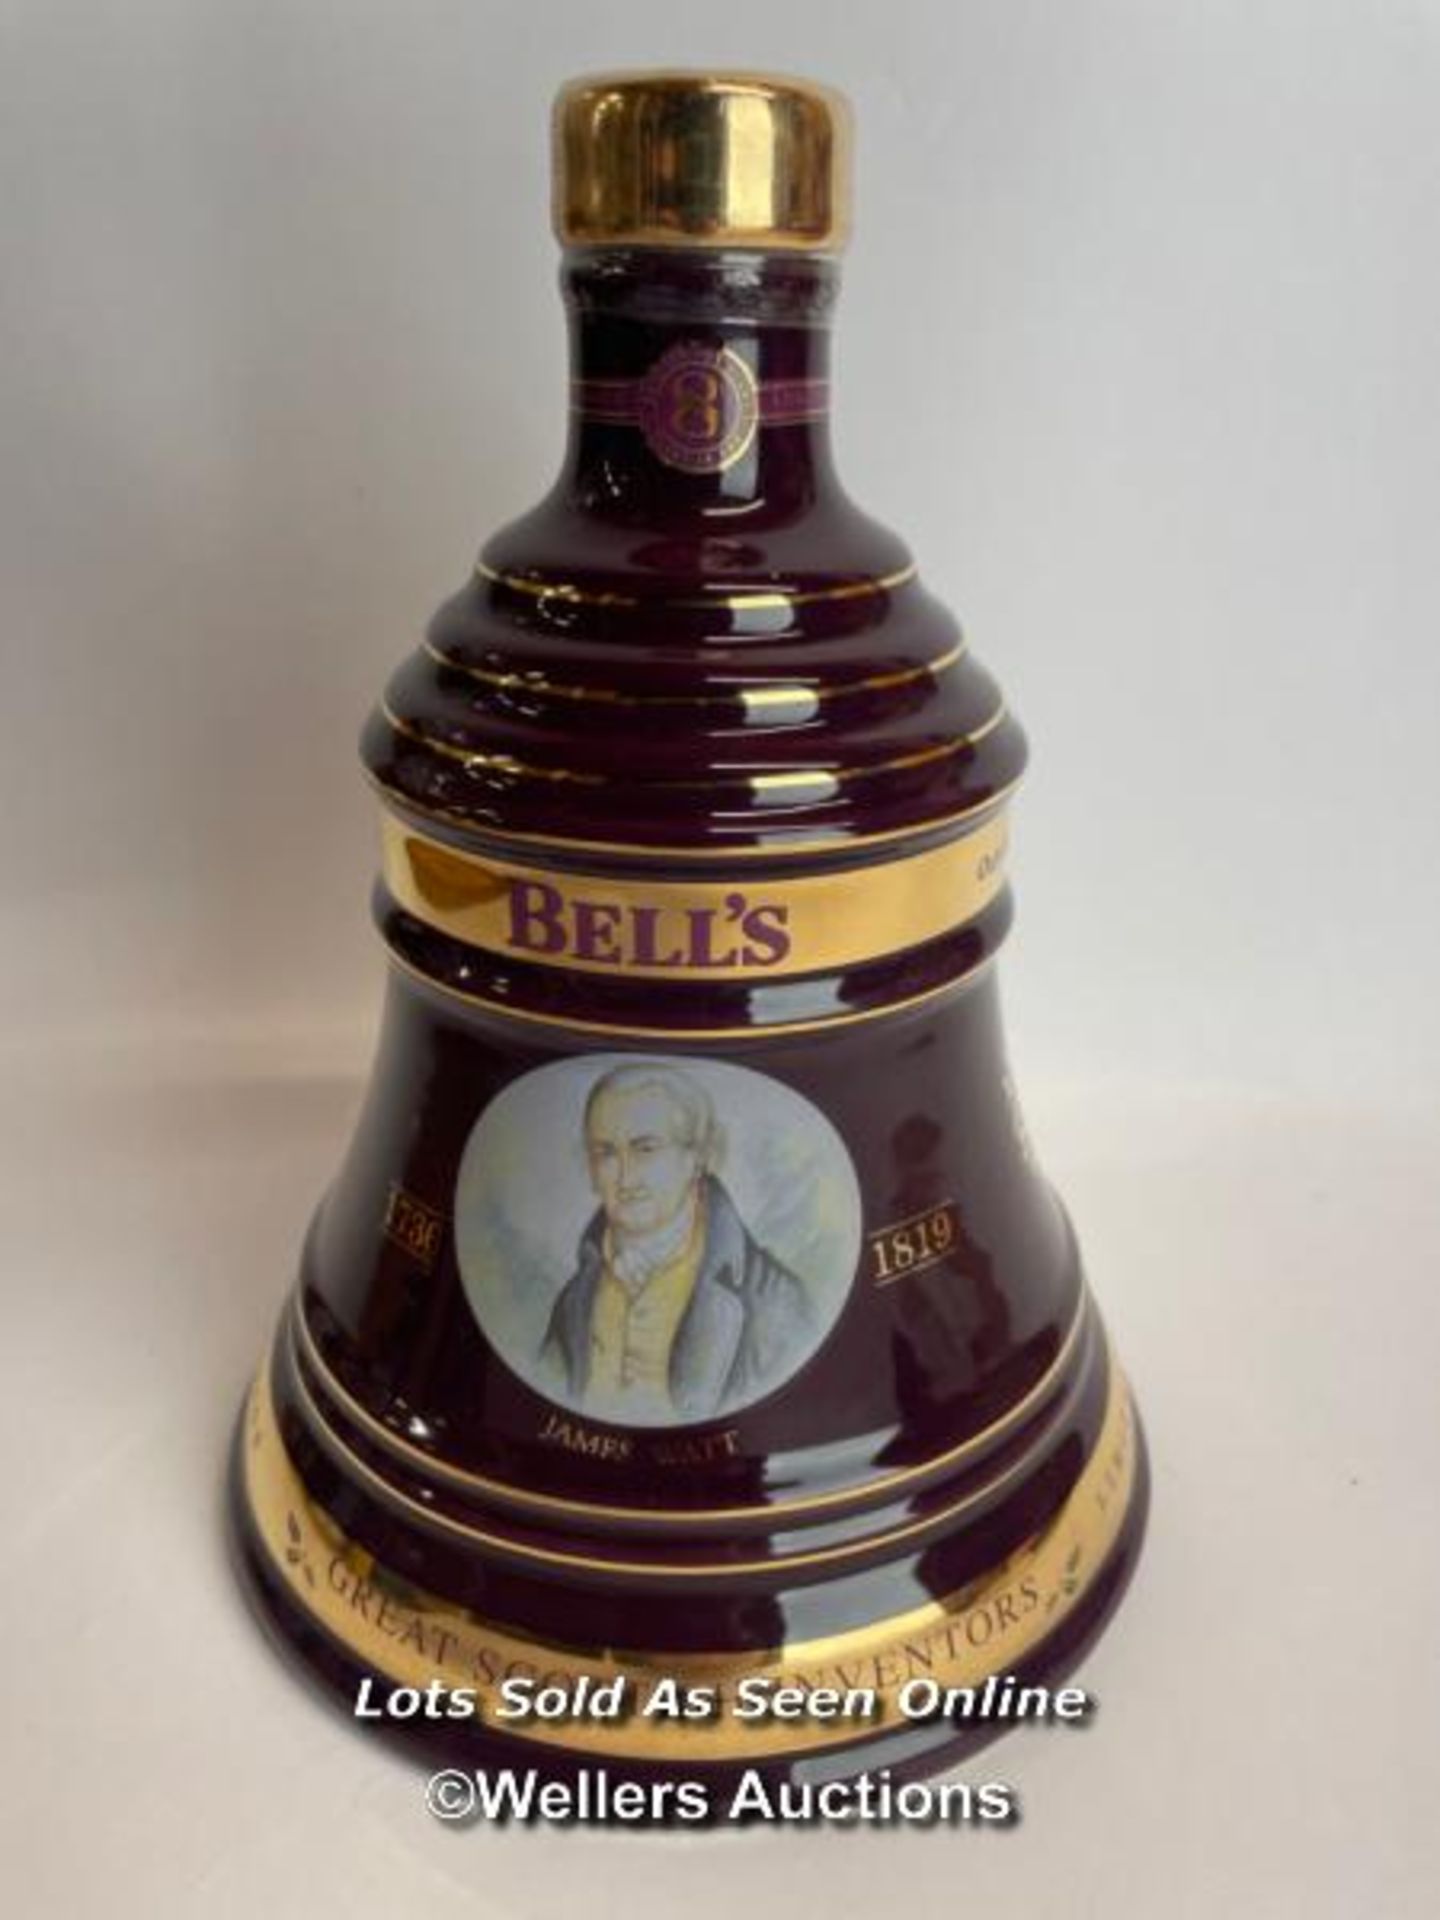 Bell's 2002 Old Scotch Whisky Limited Edition Christmas Decanter, Aged 8 Years, Brand New and Boxed, - Image 3 of 8